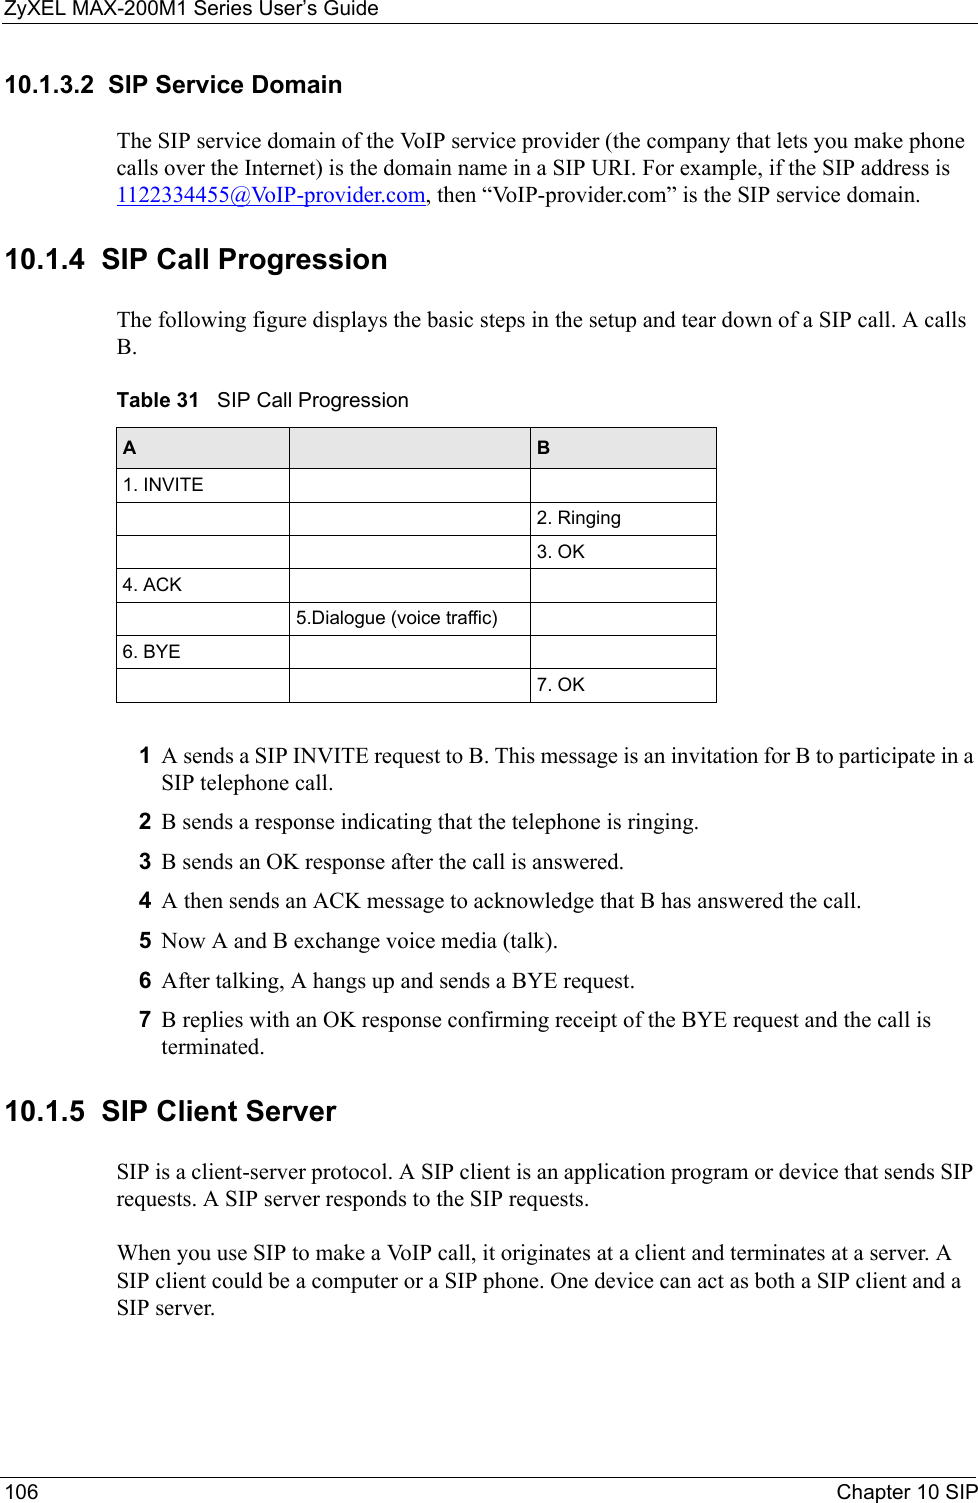 ZyXEL MAX-200M1 Series User’s Guide106 Chapter 10 SIP10.1.3.2  SIP Service DomainThe SIP service domain of the VoIP service provider (the company that lets you make phone calls over the Internet) is the domain name in a SIP URI. For example, if the SIP address is 1122334455@VoIP-provider.com, then “VoIP-provider.com” is the SIP service domain.10.1.4  SIP Call ProgressionThe following figure displays the basic steps in the setup and tear down of a SIP call. A calls B. 1A sends a SIP INVITE request to B. This message is an invitation for B to participate in a SIP telephone call. 2B sends a response indicating that the telephone is ringing.3B sends an OK response after the call is answered. 4A then sends an ACK message to acknowledge that B has answered the call. 5Now A and B exchange voice media (talk). 6After talking, A hangs up and sends a BYE request. 7B replies with an OK response confirming receipt of the BYE request and the call is terminated.10.1.5  SIP Client ServerSIP is a client-server protocol. A SIP client is an application program or device that sends SIP requests. A SIP server responds to the SIP requests. When you use SIP to make a VoIP call, it originates at a client and terminates at a server. A SIP client could be a computer or a SIP phone. One device can act as both a SIP client and a SIP server. Table 31   SIP Call ProgressionA B1. INVITE2. Ringing3. OK4. ACK 5.Dialogue (voice traffic)6. BYE7. OK